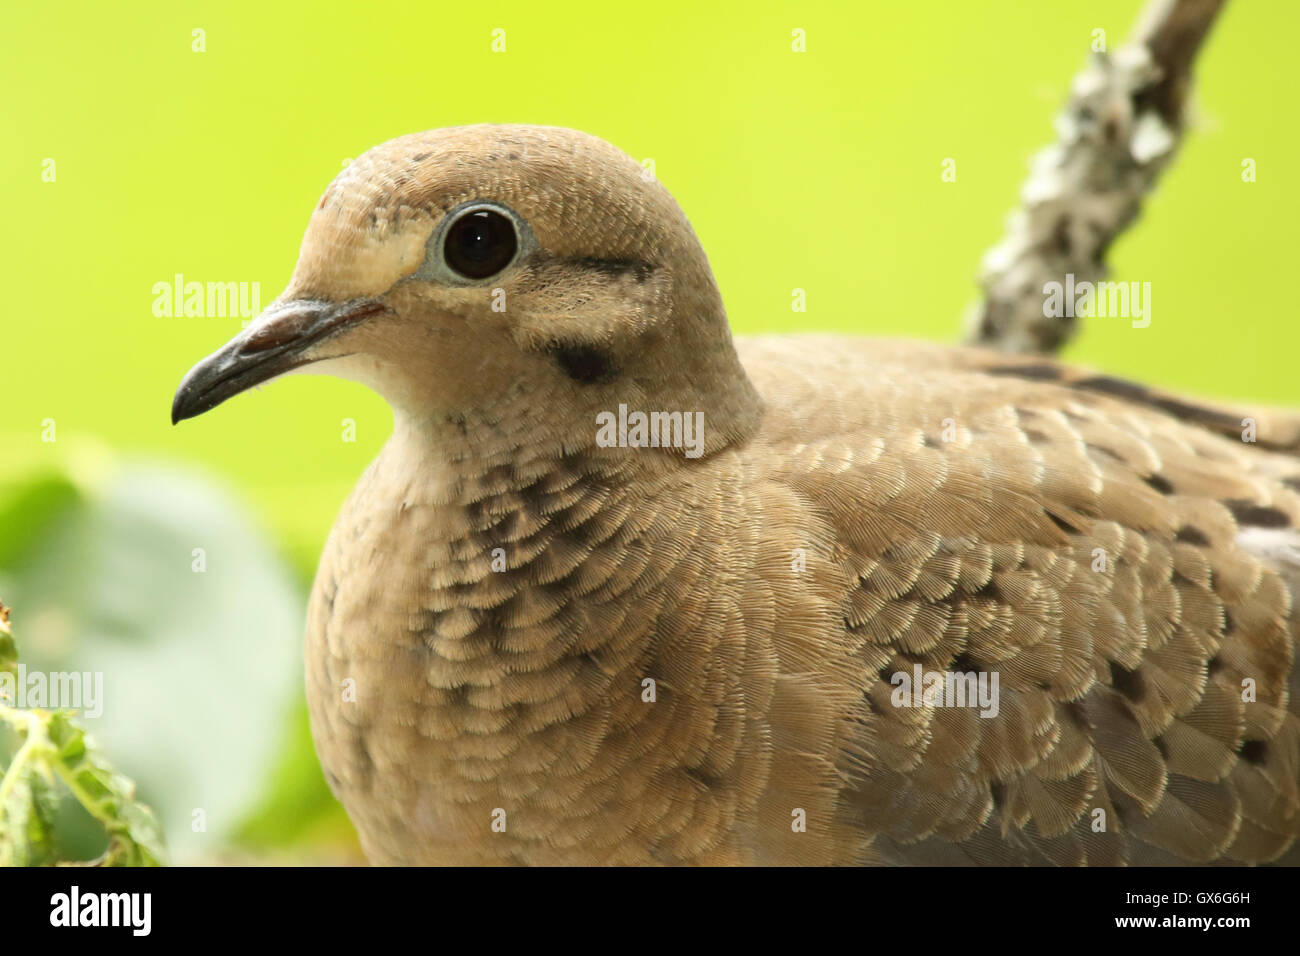 A close portrait of a Mourning Dove. Stock Photo